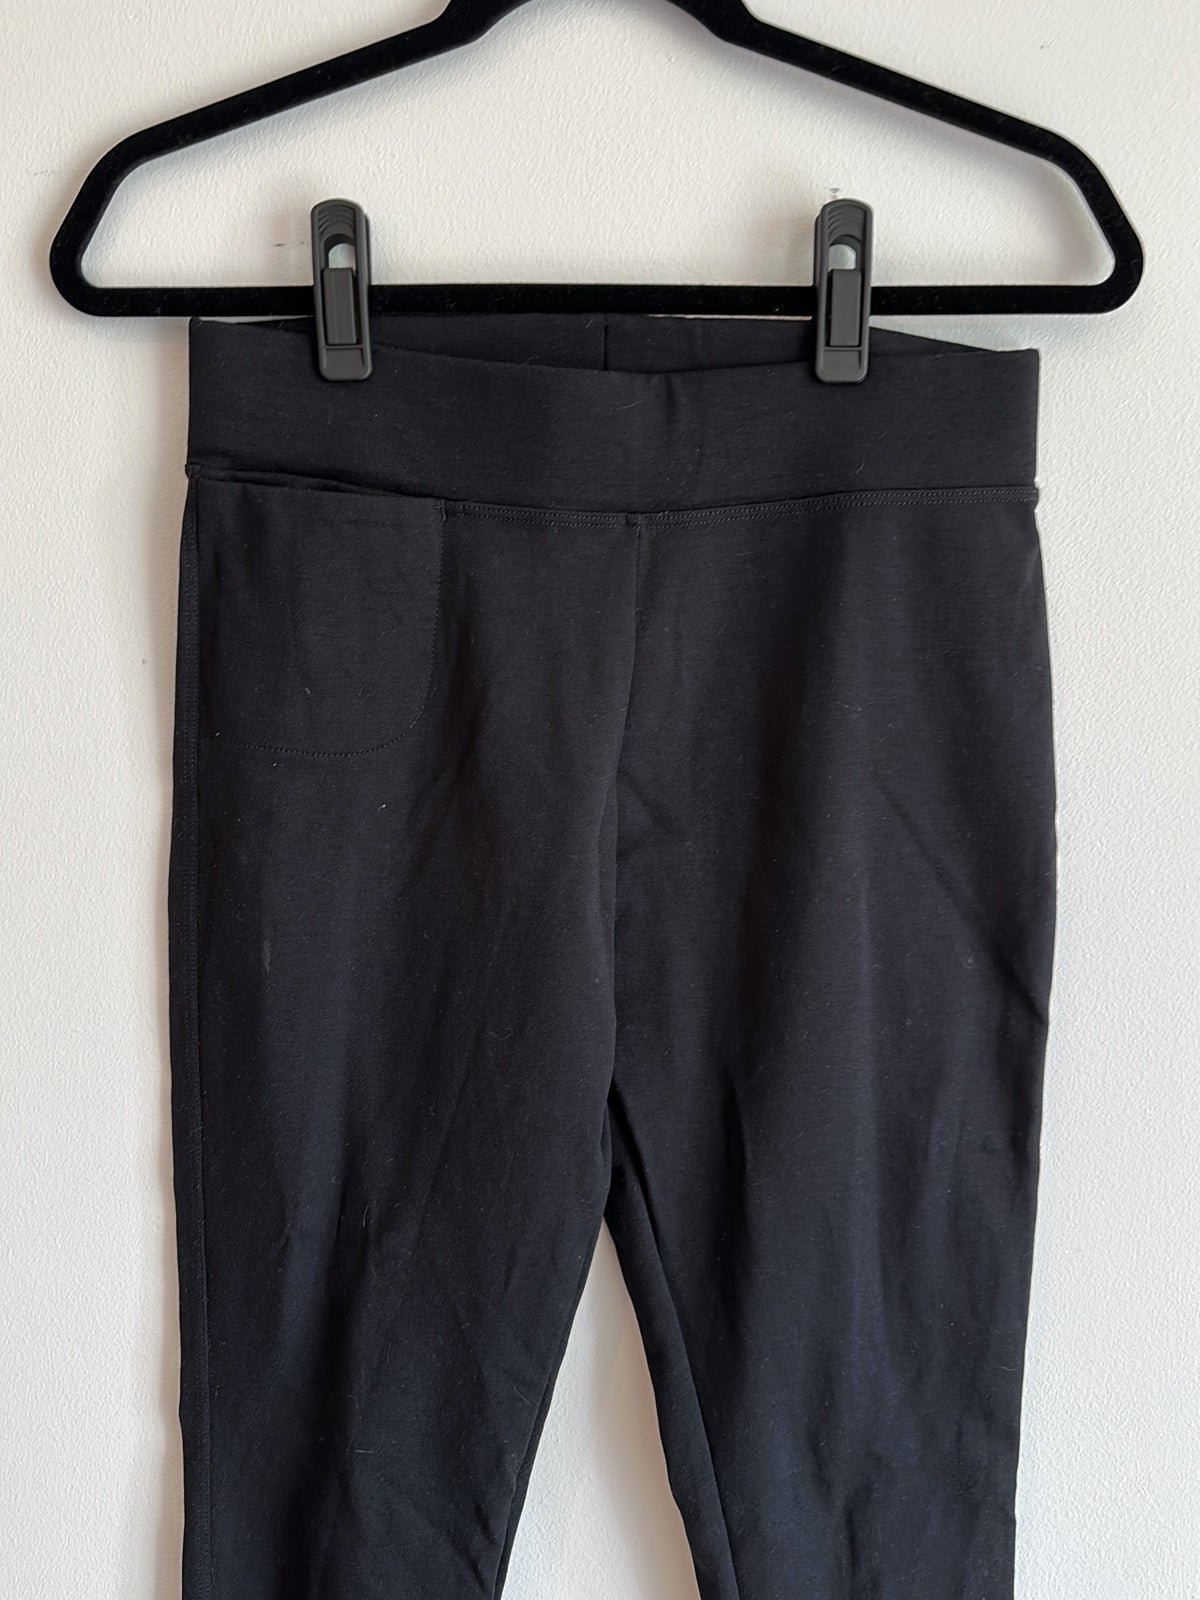 floor price NWOT American Giant No-Bs Pant black leggings size small TALL MjMp4fvKJ just for you